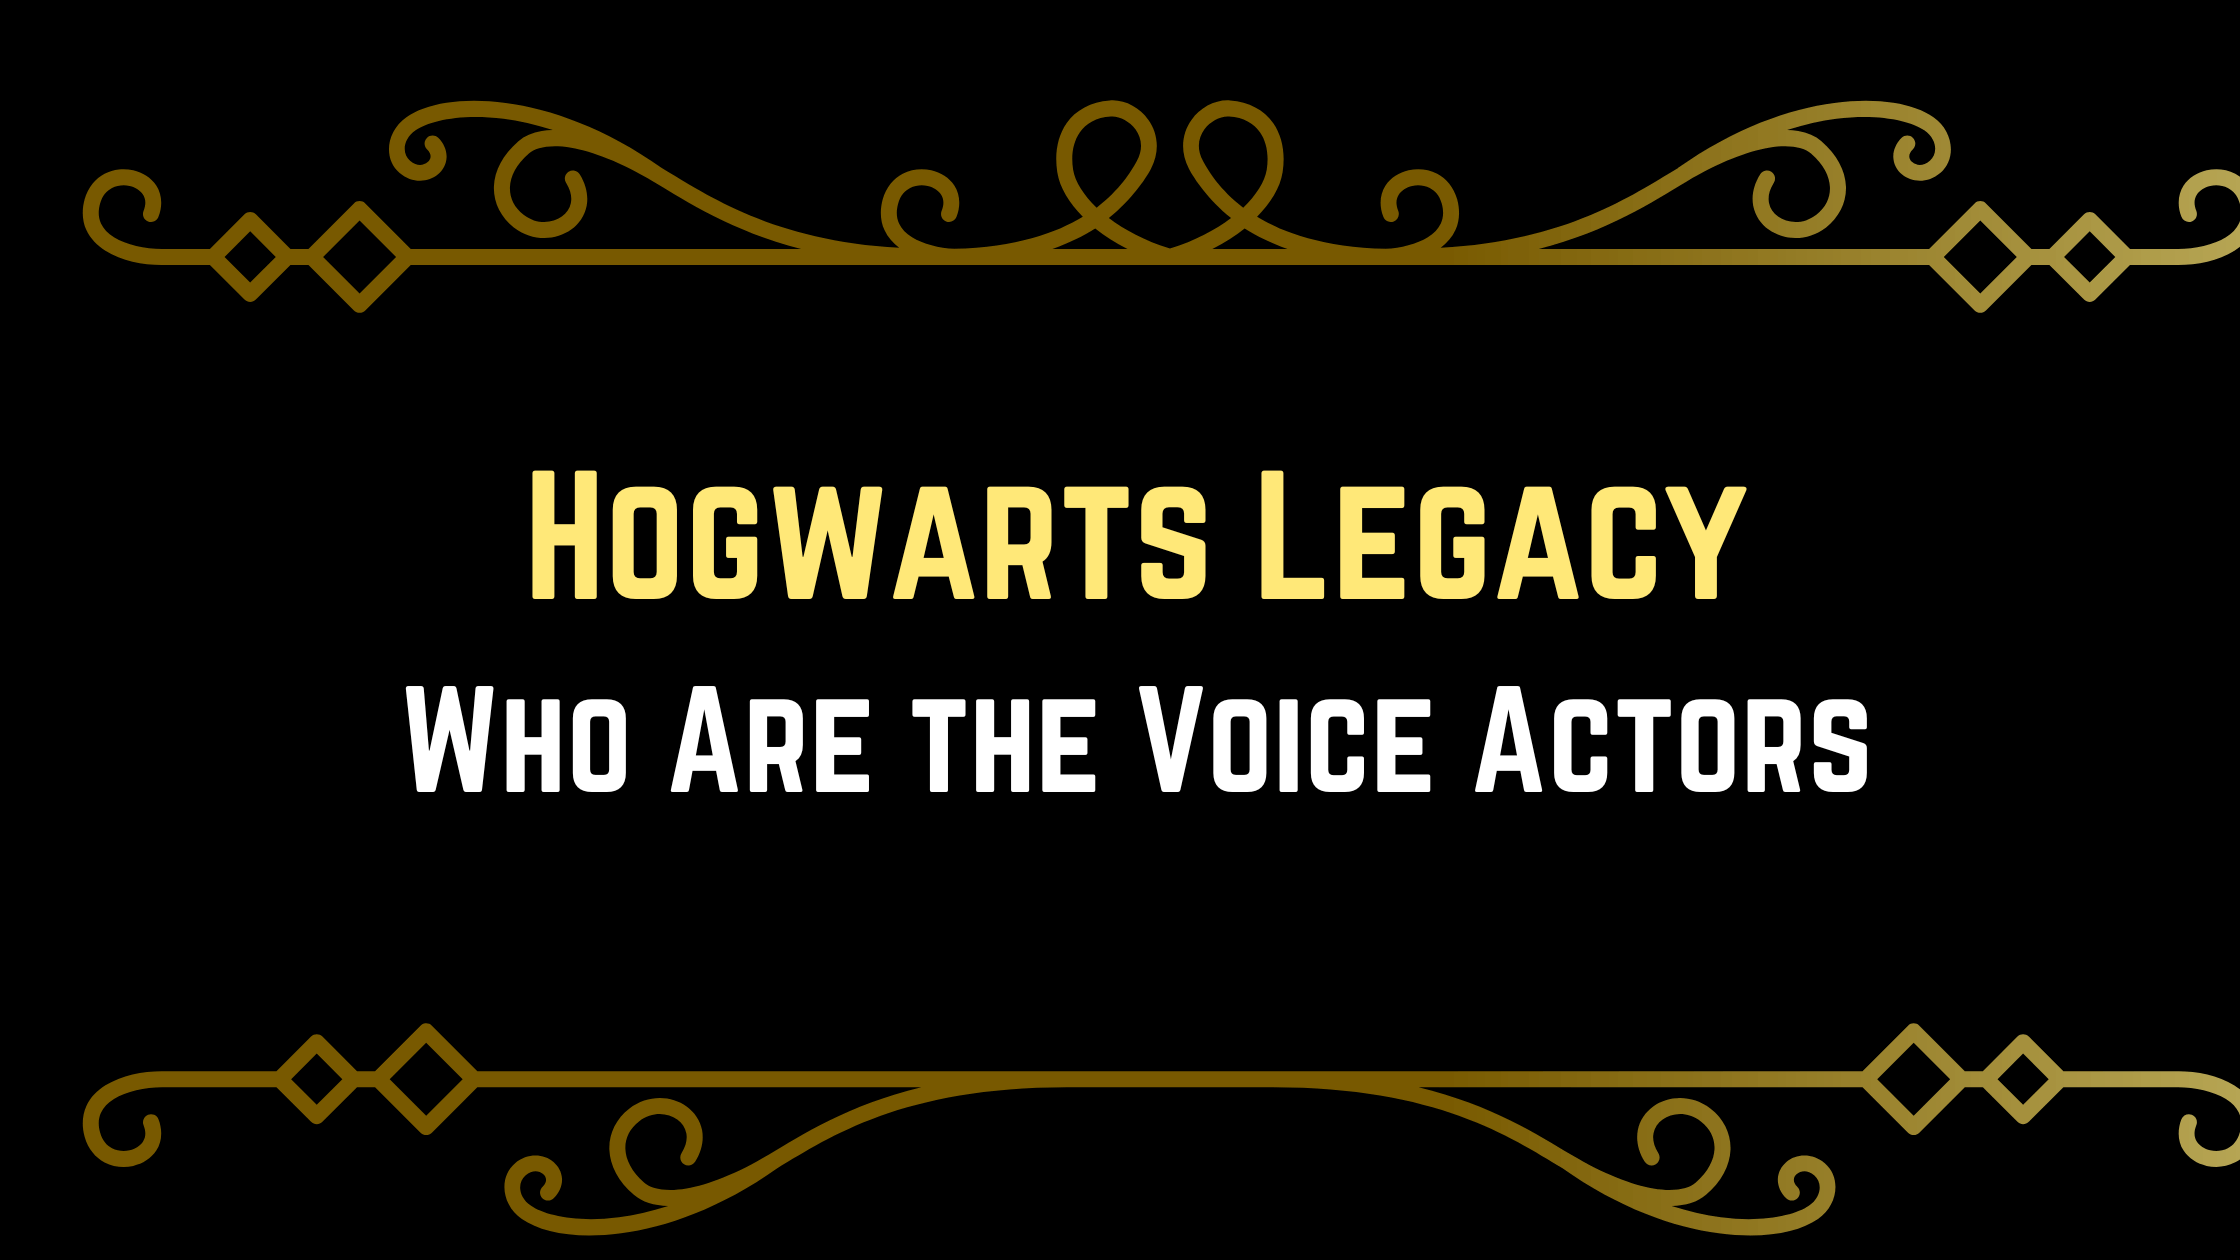 Who Are the Hogwarts Legacy Voice Actors